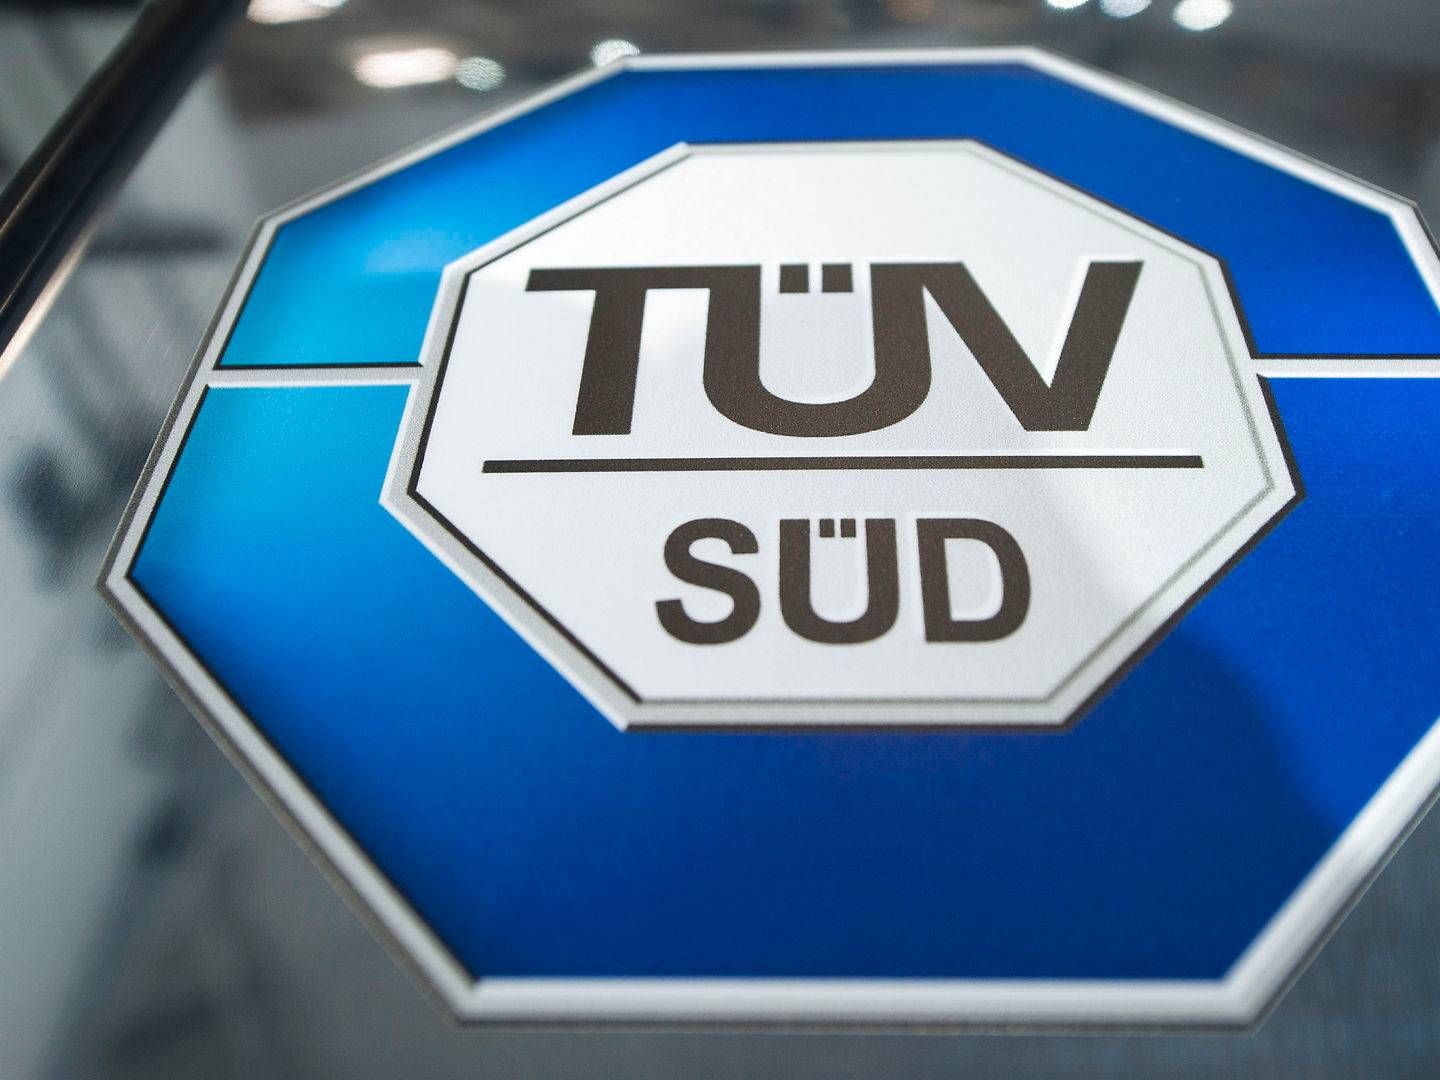 German Tüv Süd continues to be the only applicant to become a notified body in Denmark